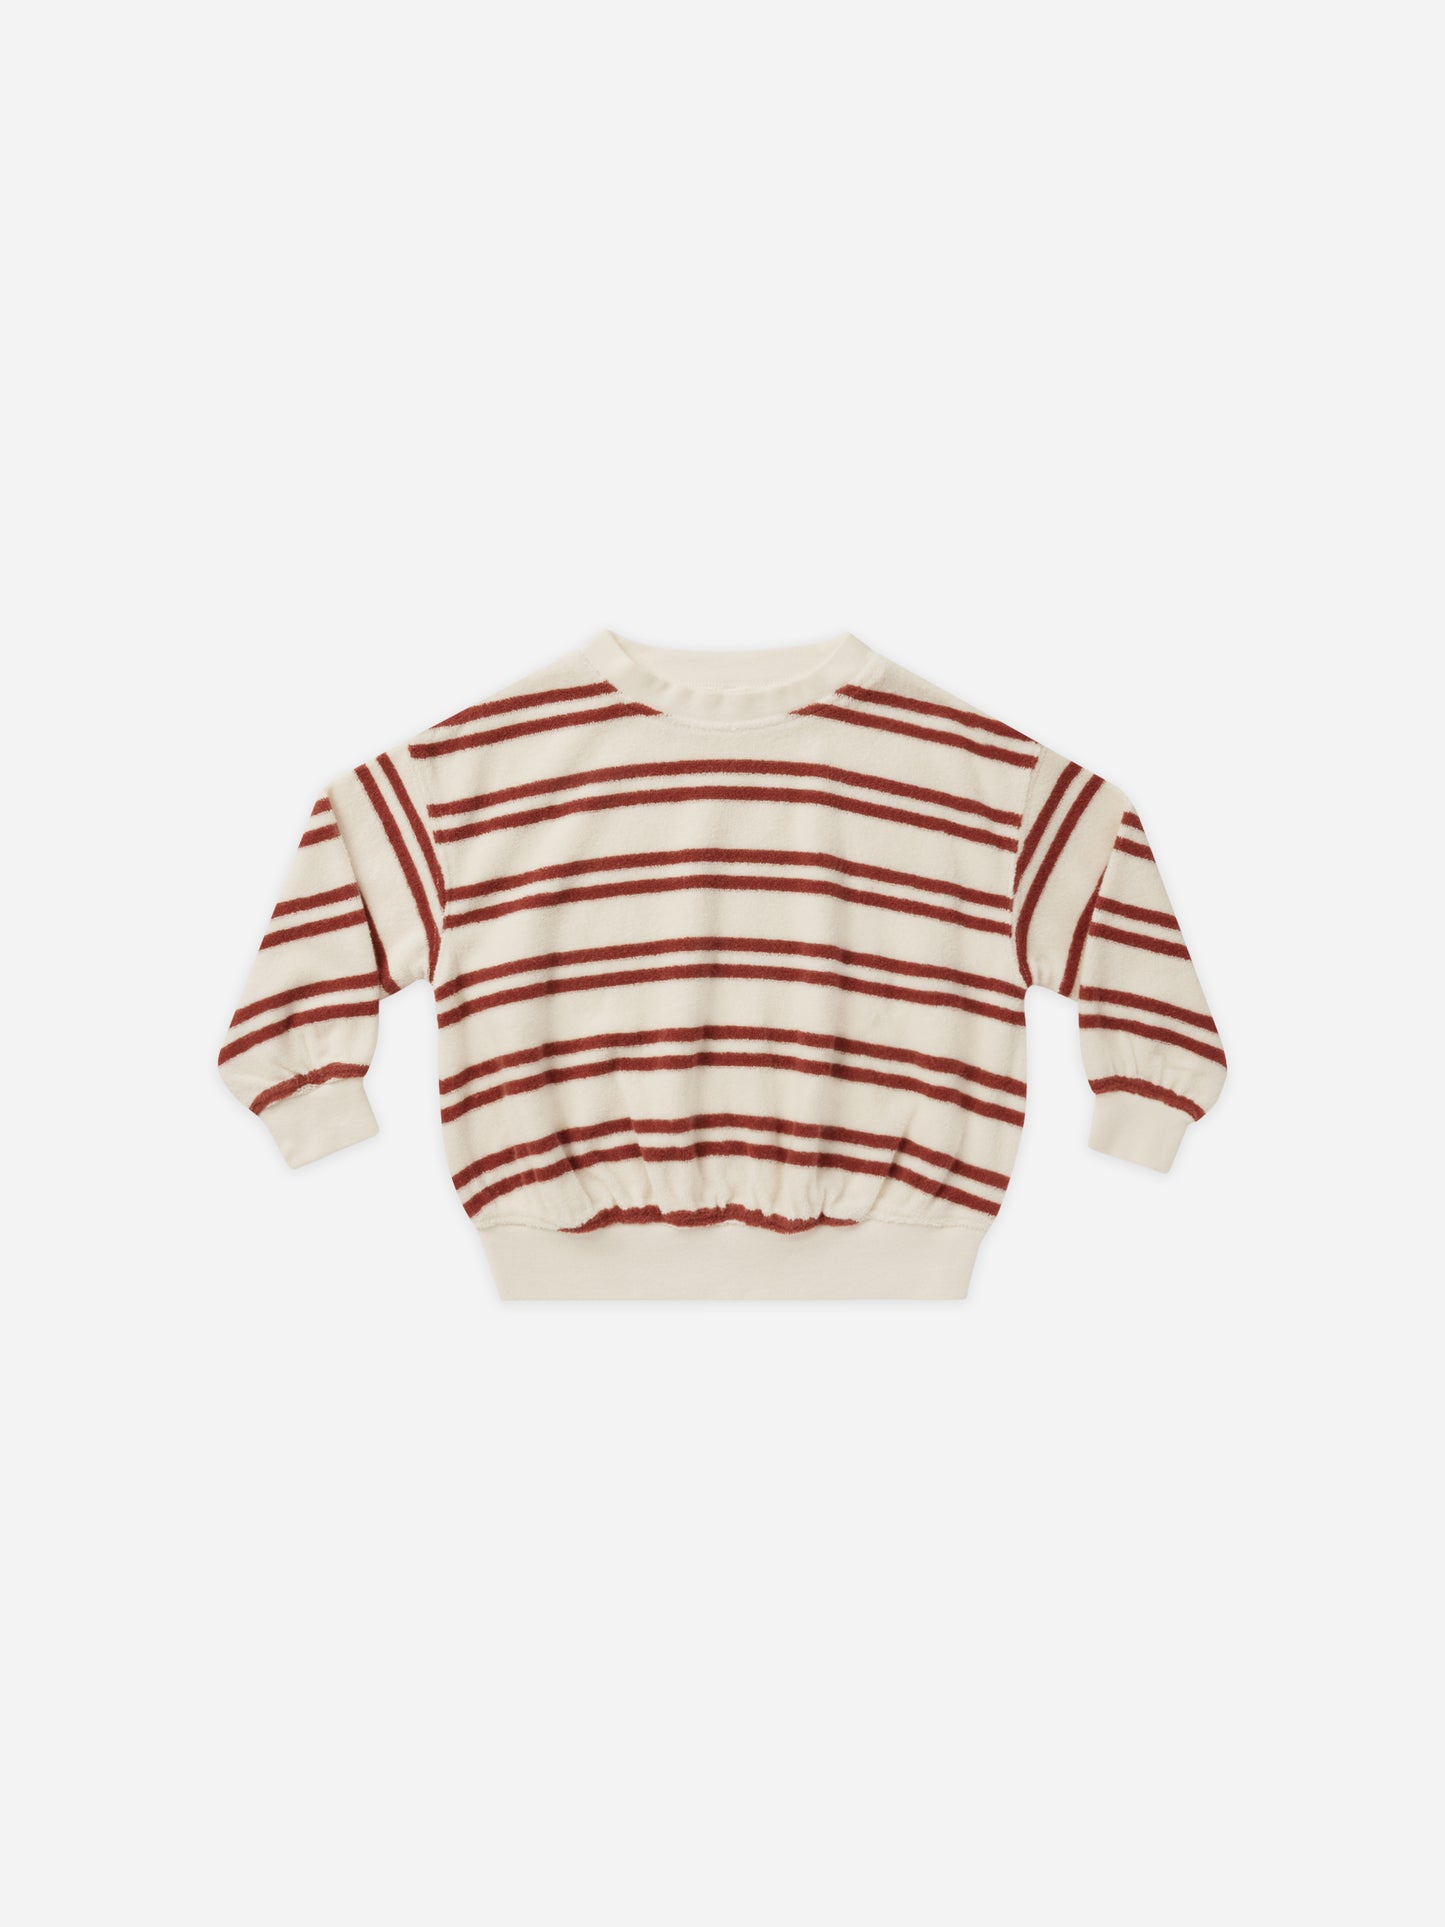 Sweatshirt || Red Stripe - Rylee + Cru | Kids Clothes | Trendy Baby Clothes | Modern Infant Outfits |